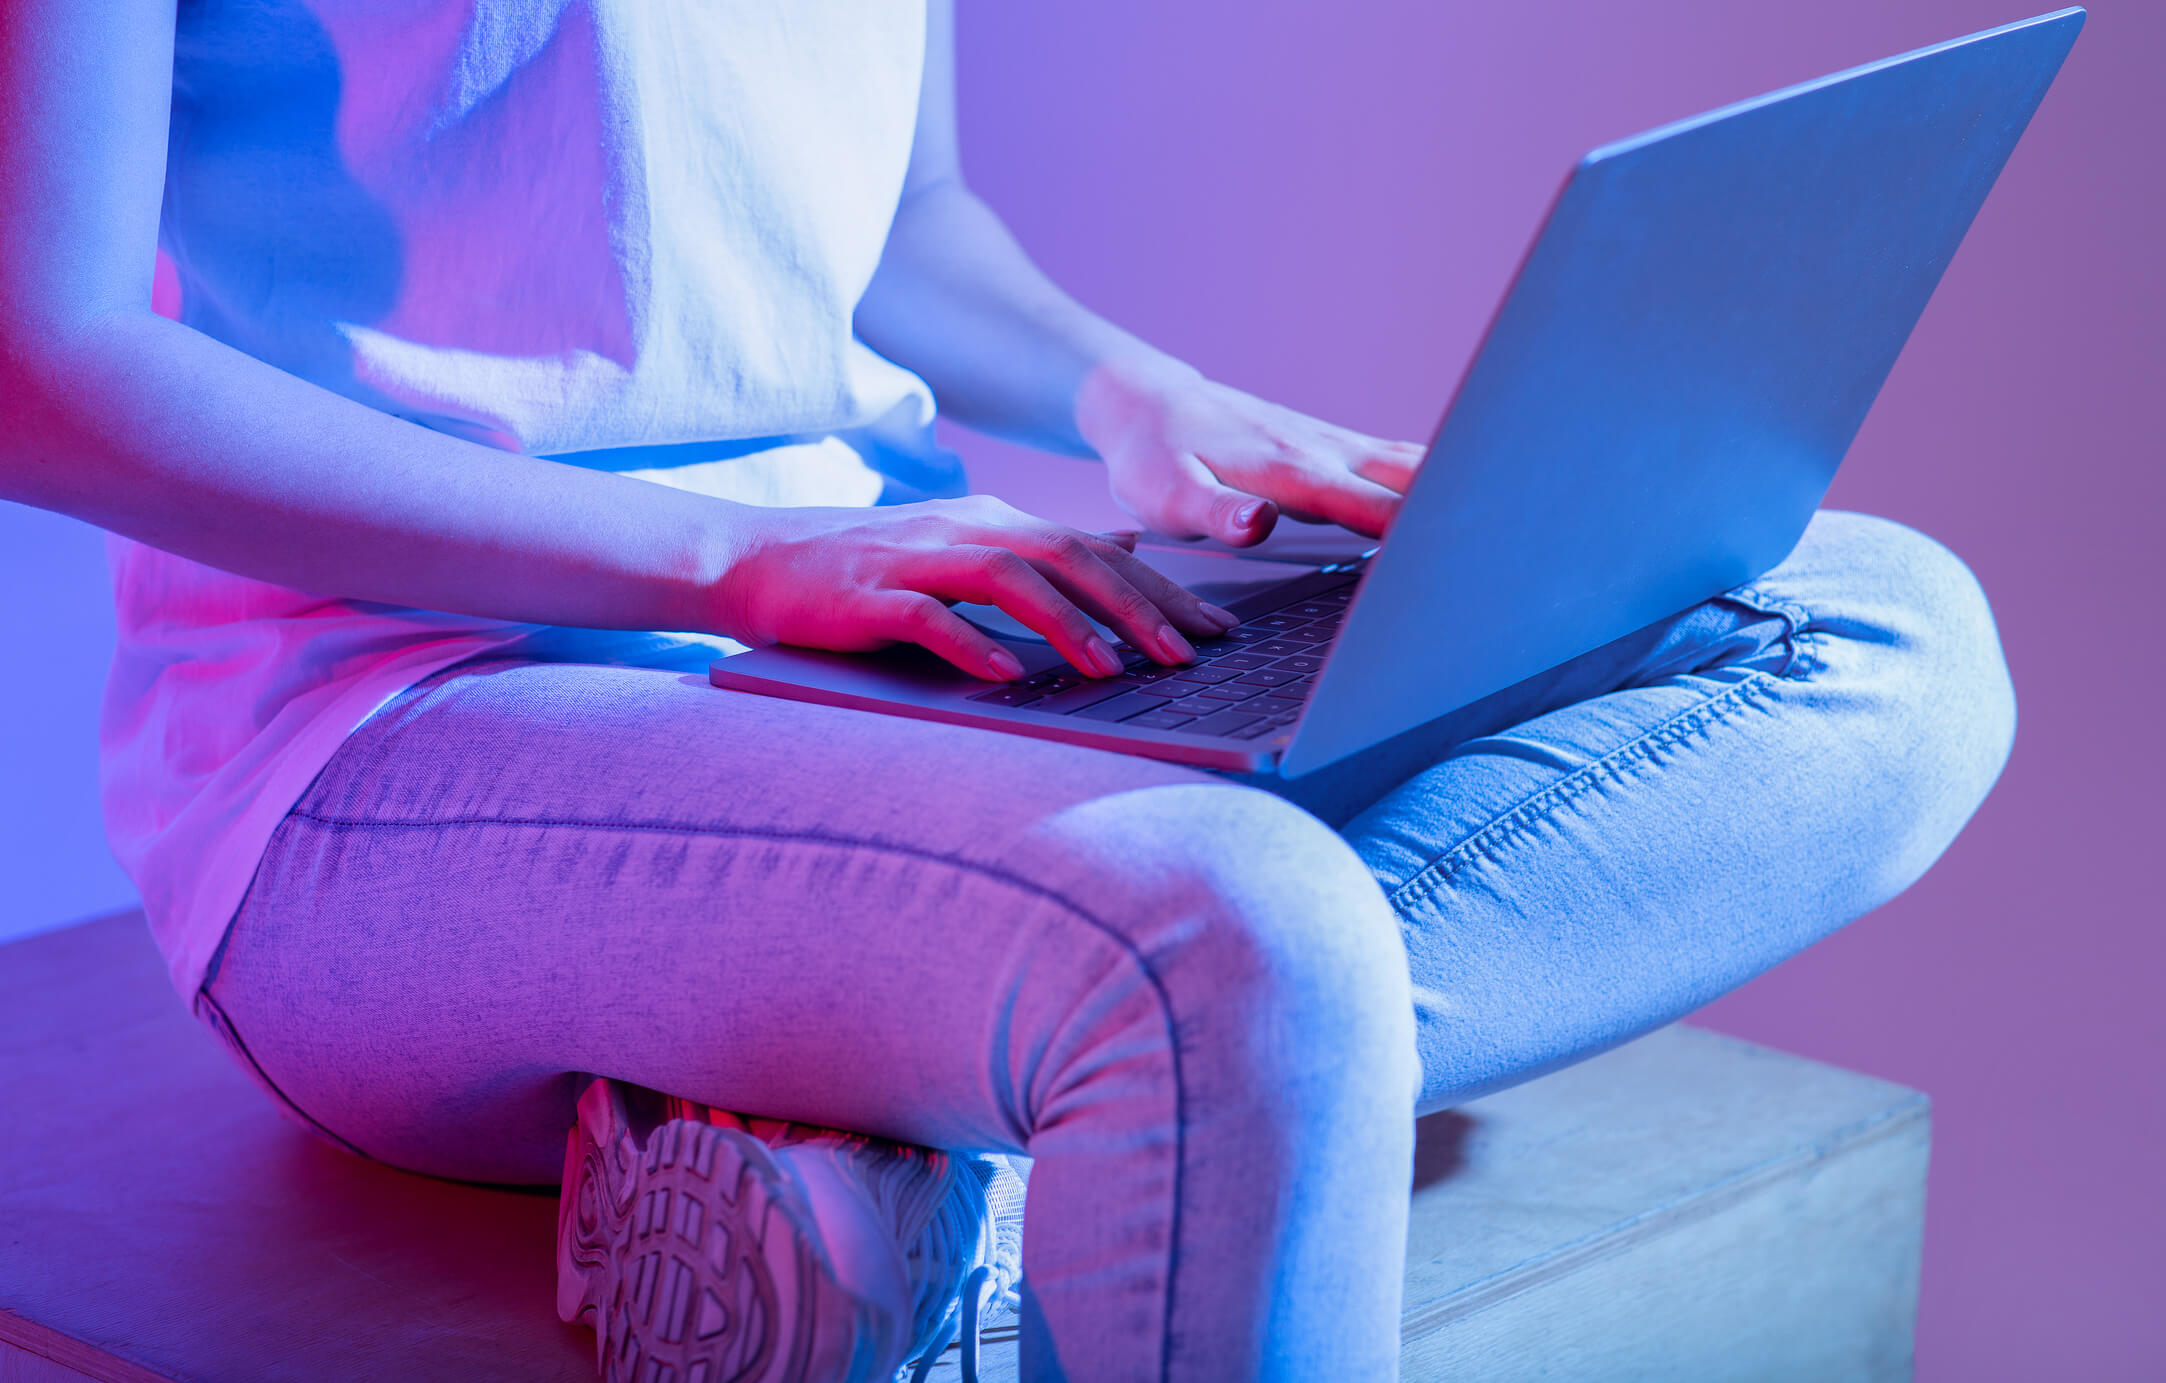 A close up shot of a woman in casual attire sitting on the couch typing on a laptop with a neon purple studio-like background